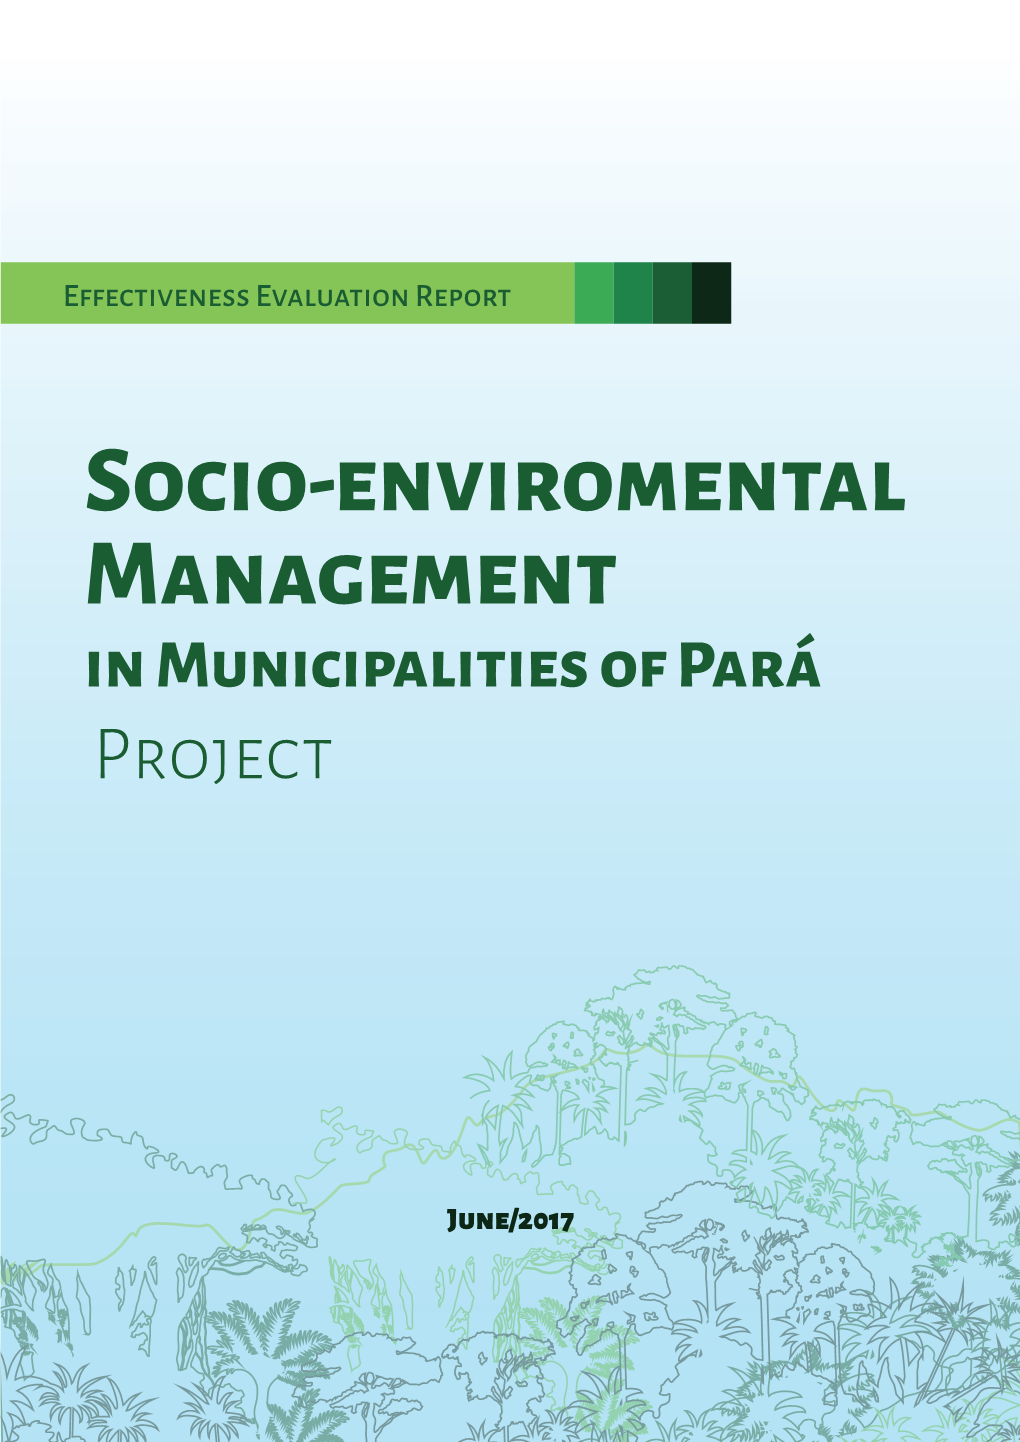 Socio-Enviromental Management in Municipalities of Pará Project